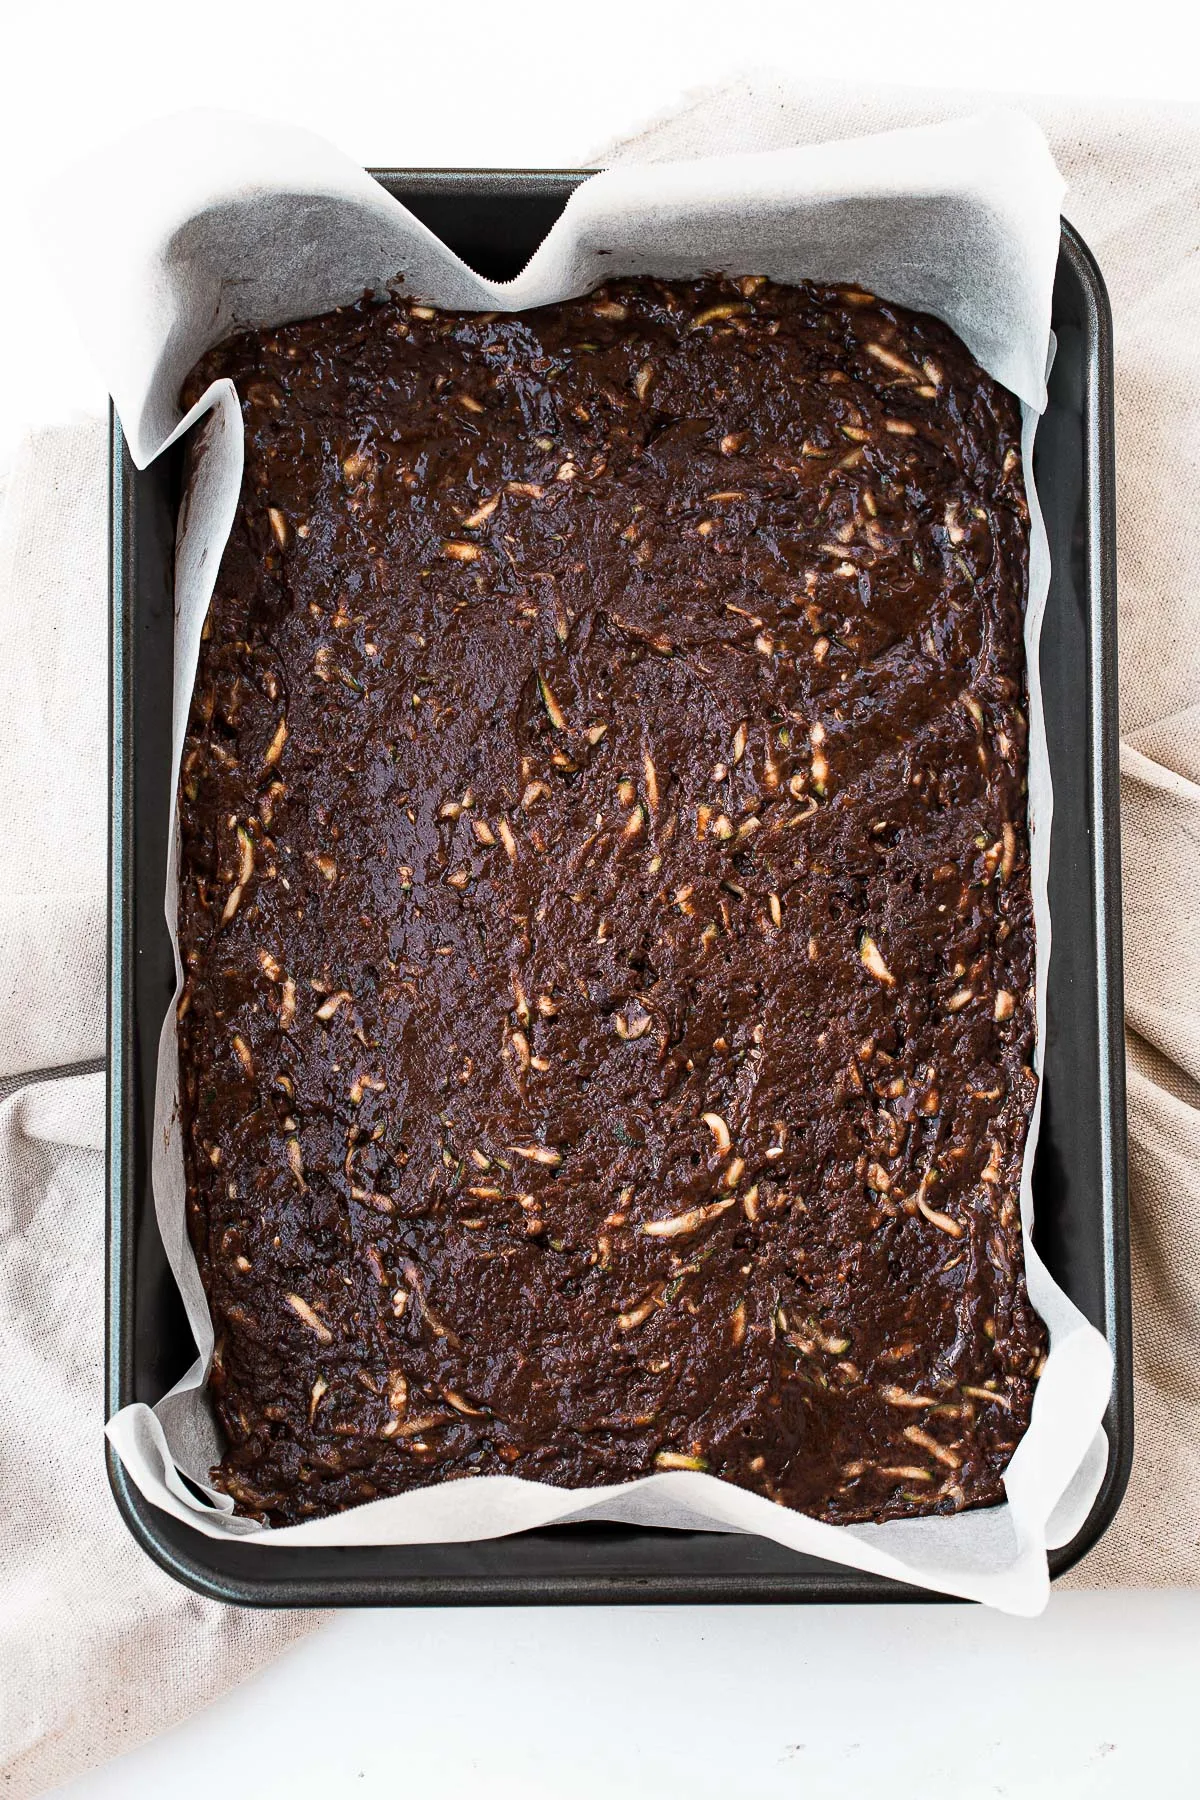 Brownie batter with zucchini in a baking dish.